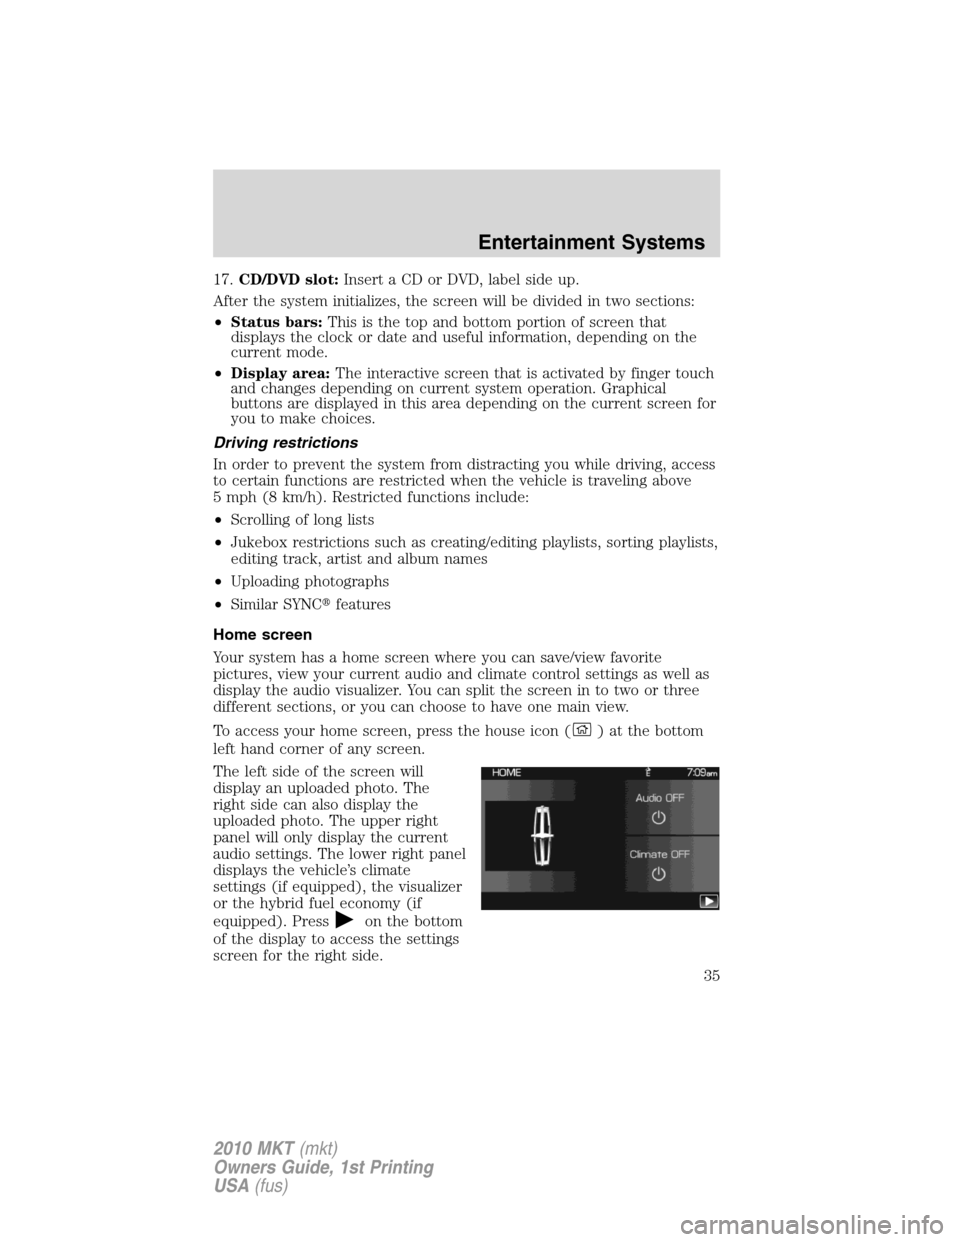 LINCOLN MKT 2010  Owners Manual 17.CD/DVD slot:Insert a CD or DVD, label side up.
After the system initializes, the screen will be divided in two sections:
•Status bars:This is the top and bottom portion of screen that
displays th